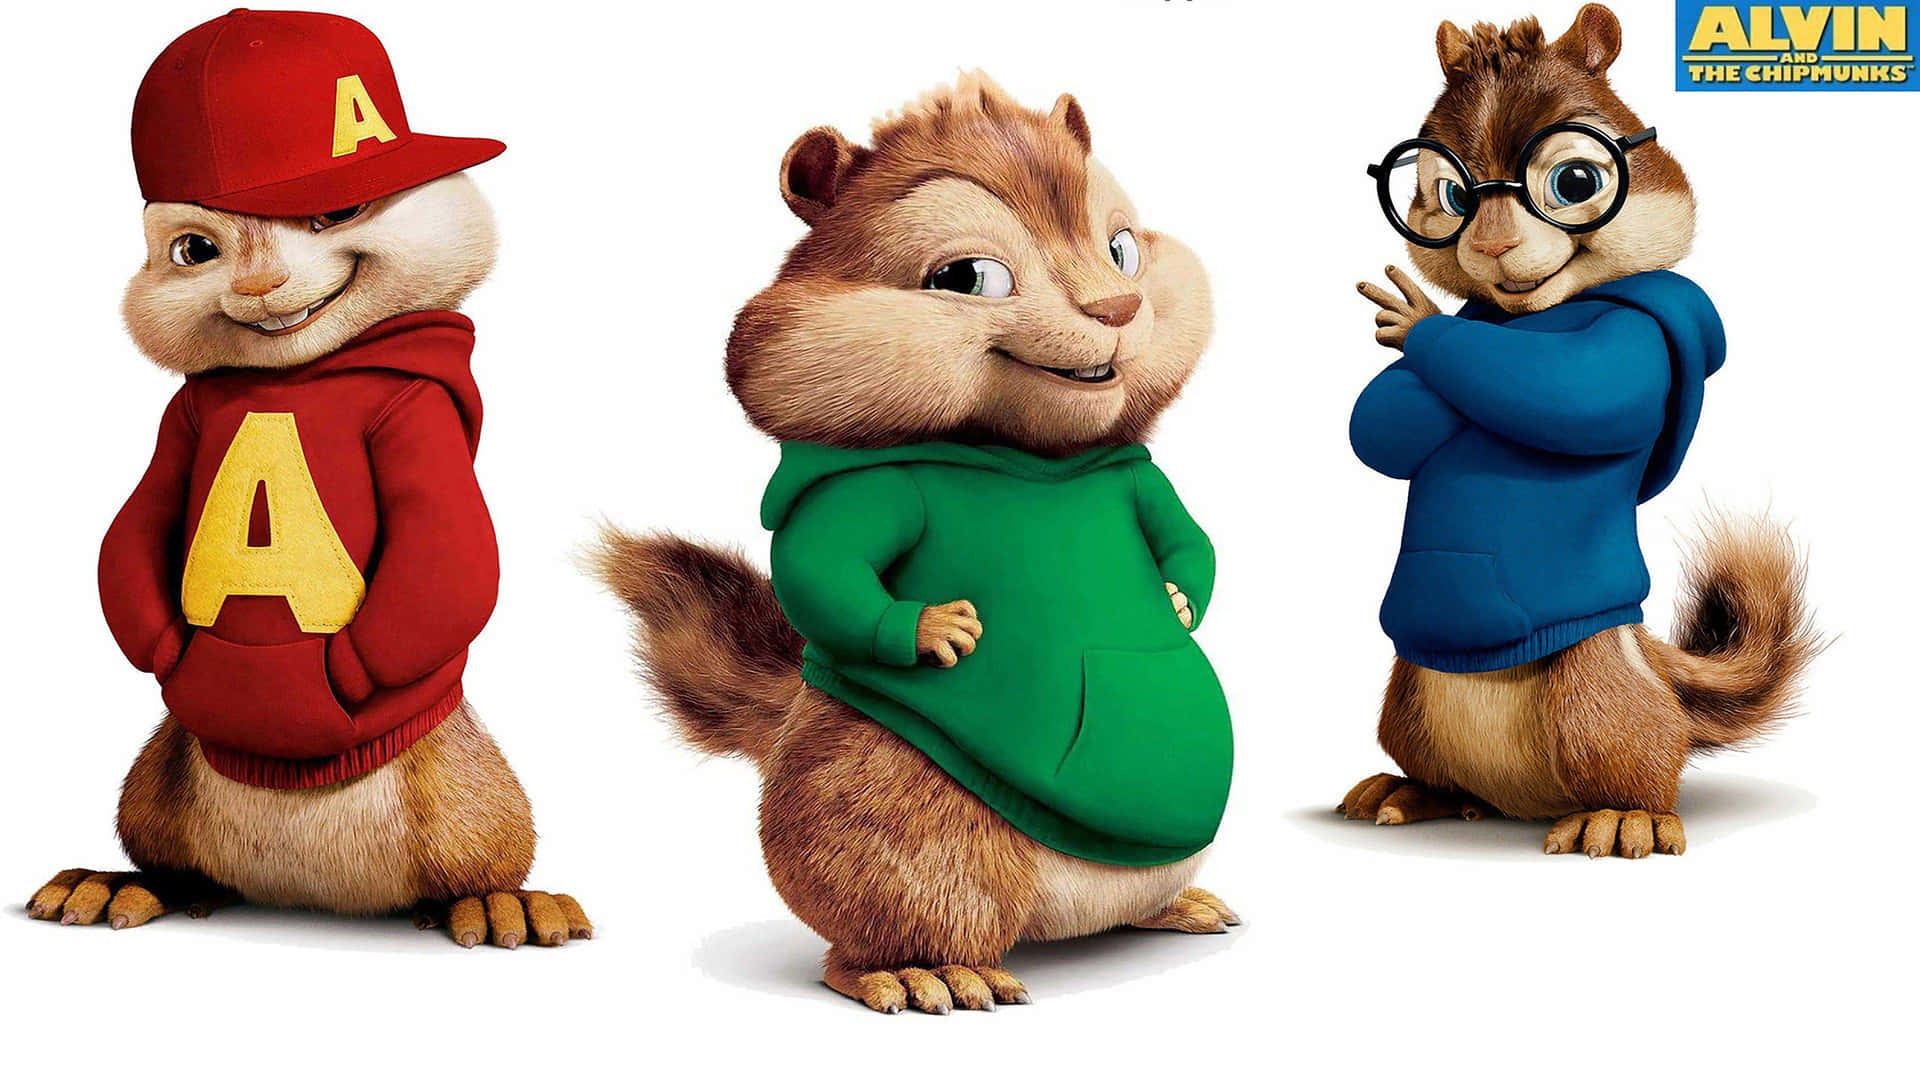 Alvin And The Chipmunks Wallpapers